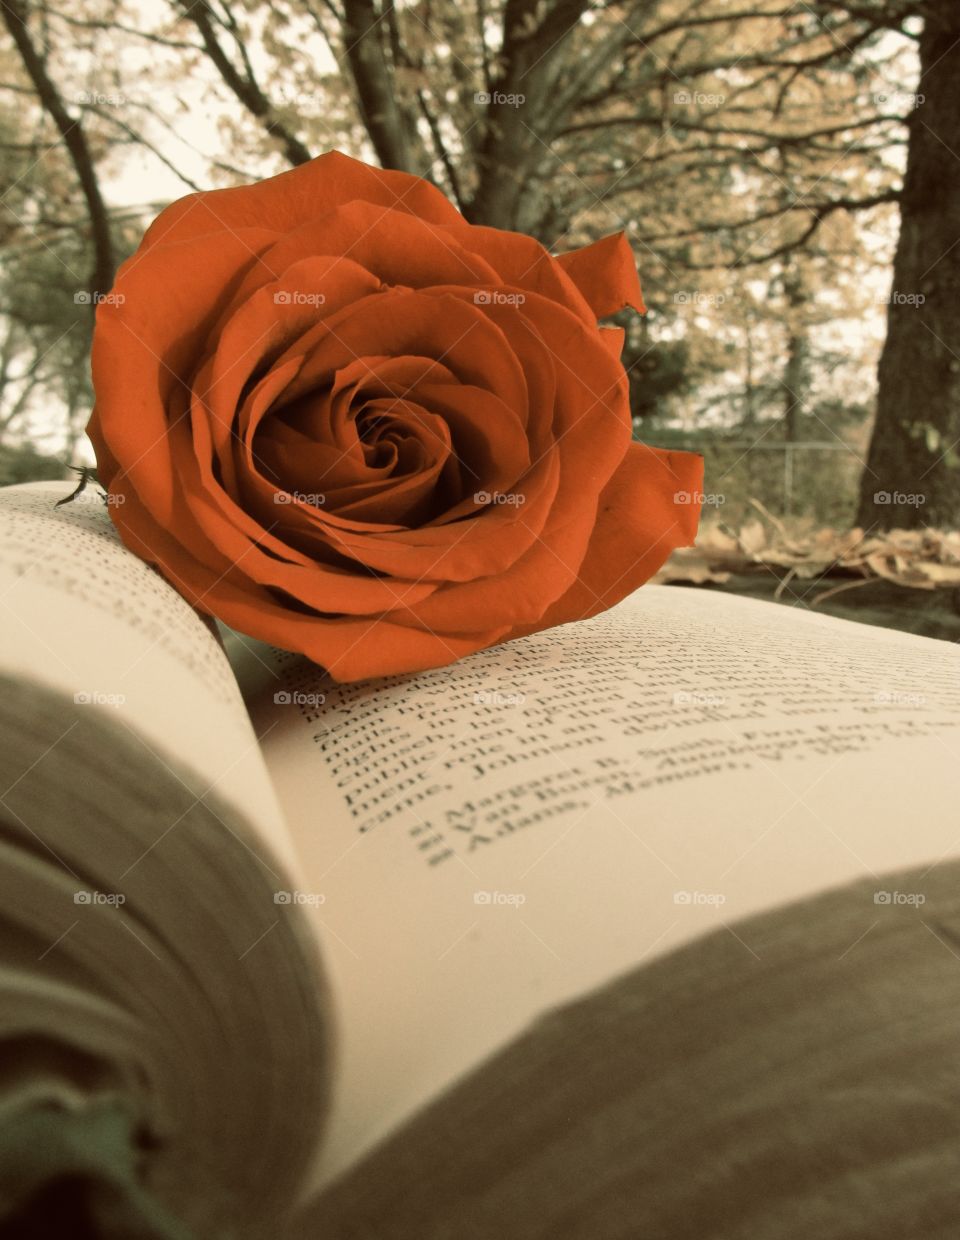 Red rose on an old book